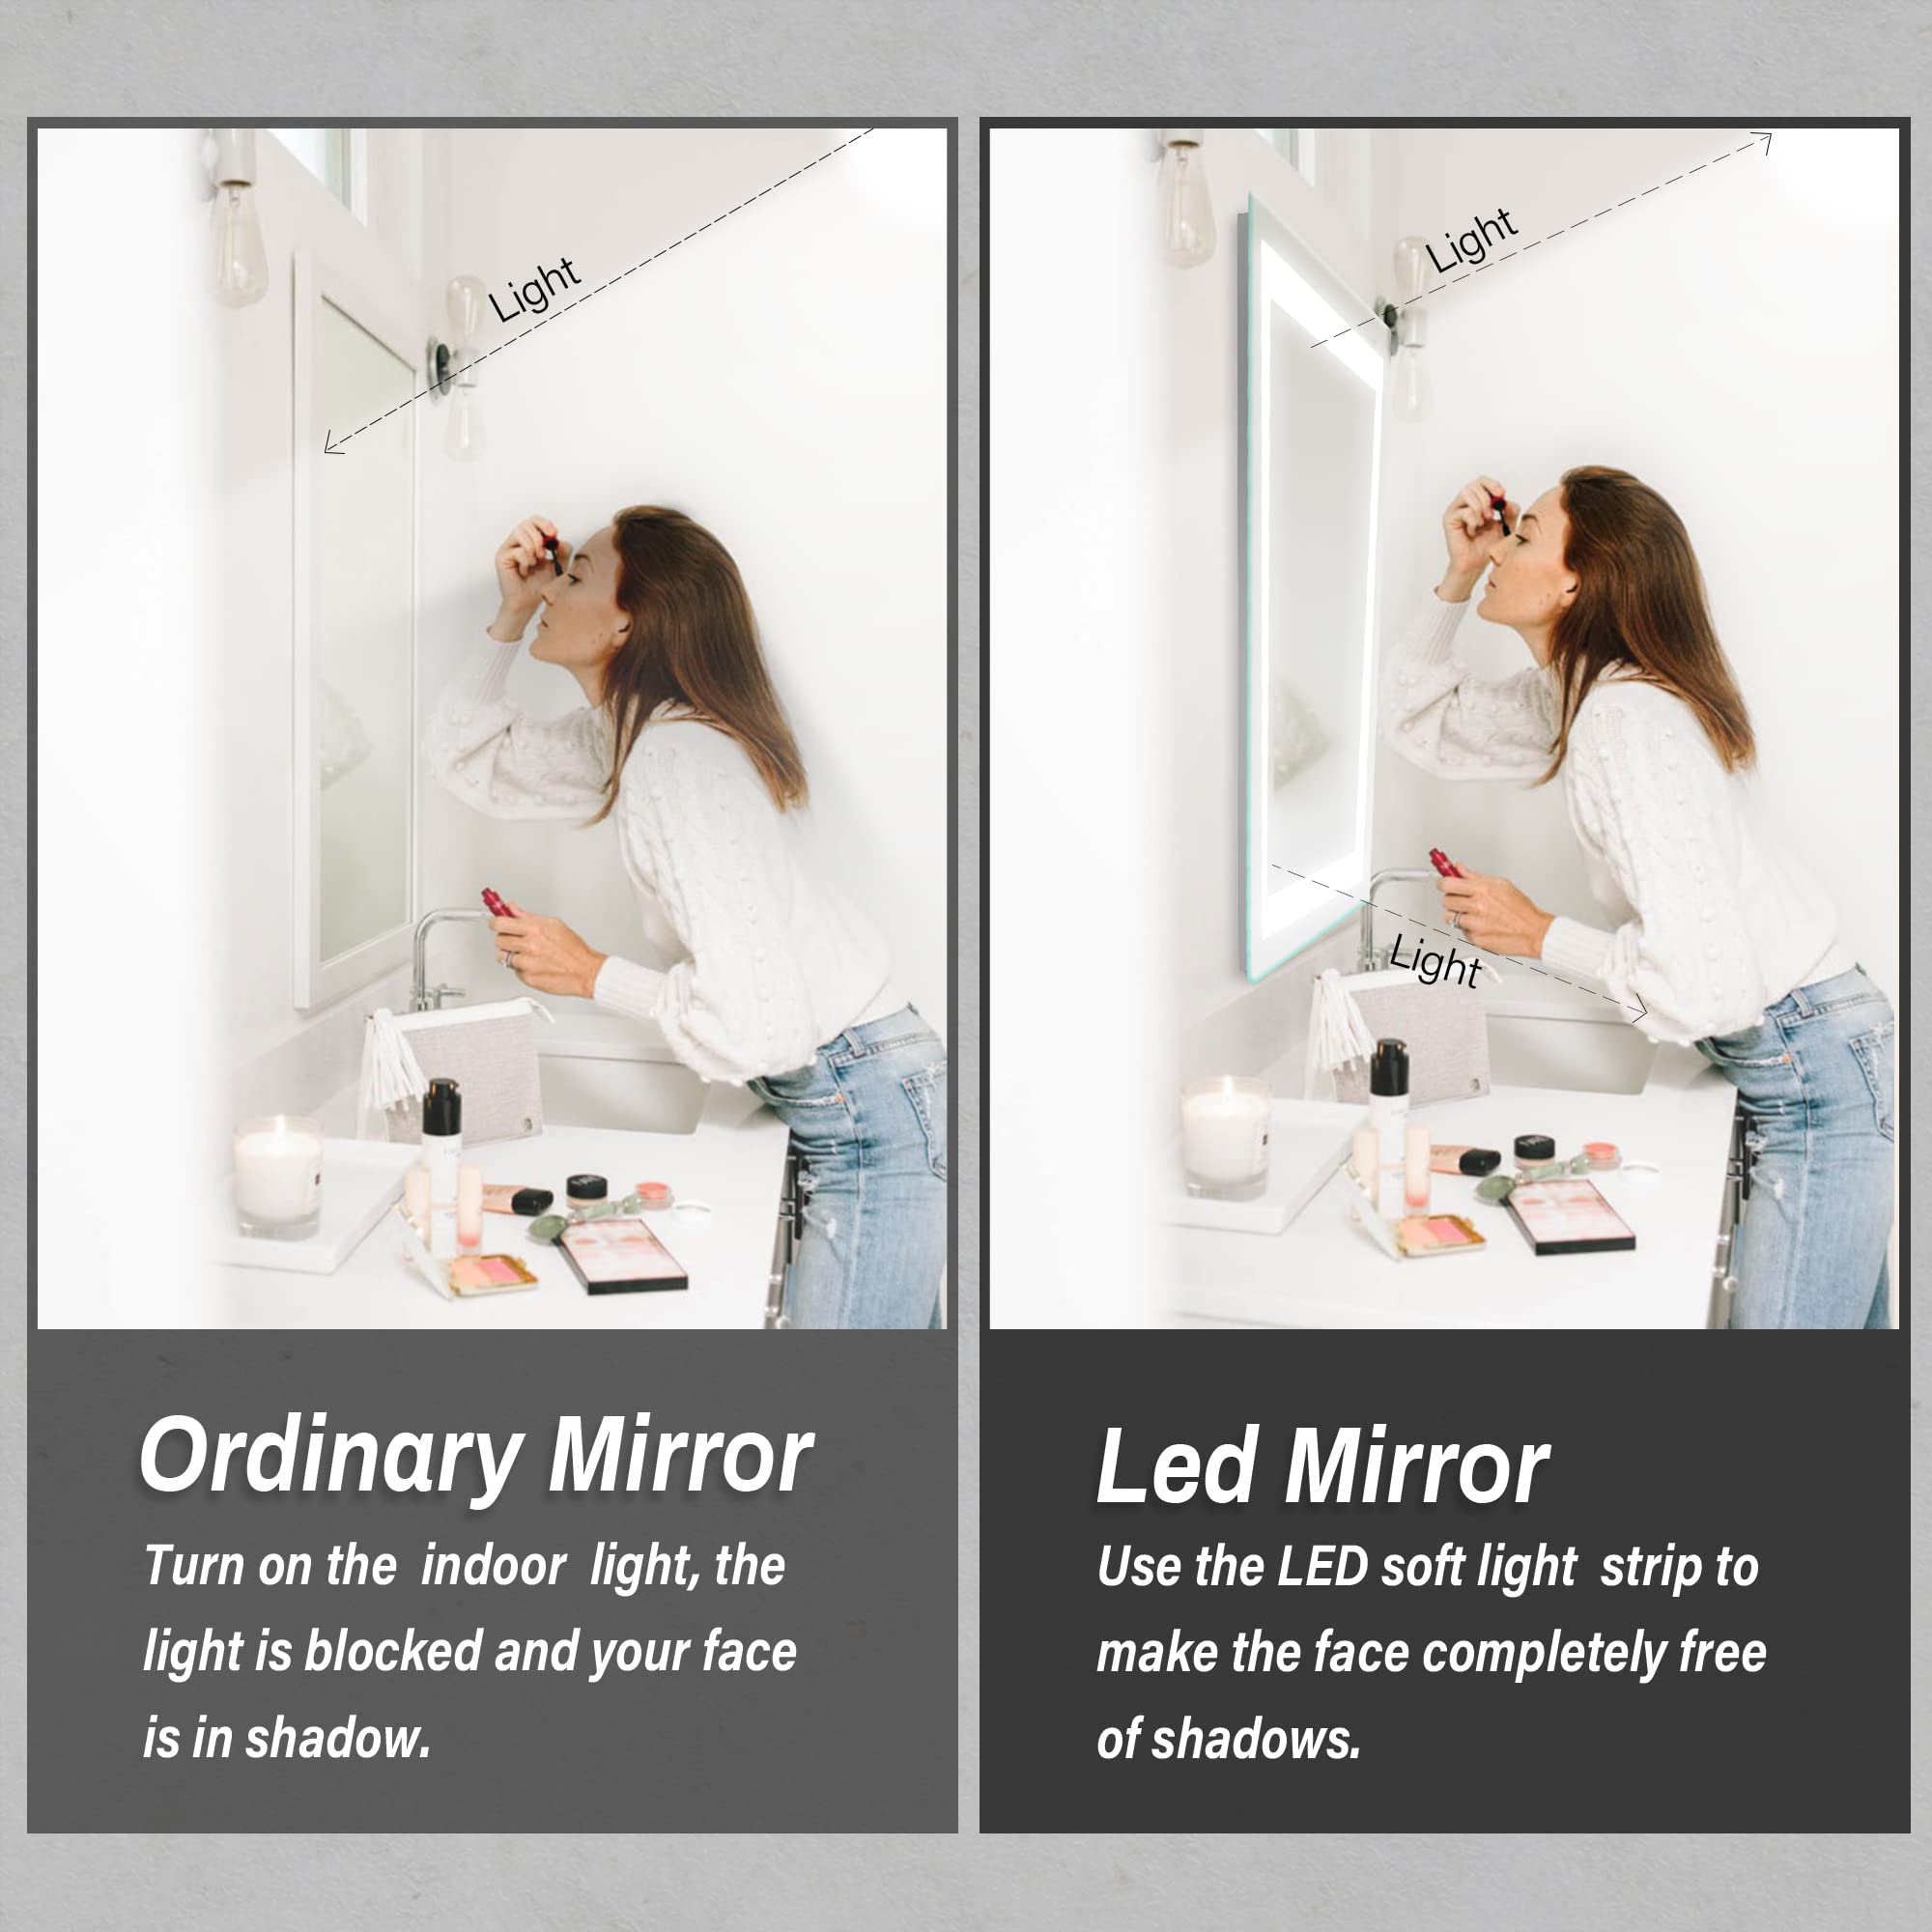 FITLAND 32"x 24" LED Bathroom Mirror Vanity Mirror, Anti-Fog, Dimmable, Color Temperature Adjustable 3000-6000K, Switch-held Memory Led Wall Mirror Suitable for Bathroom, Vanity (Vertical/Horizontal)